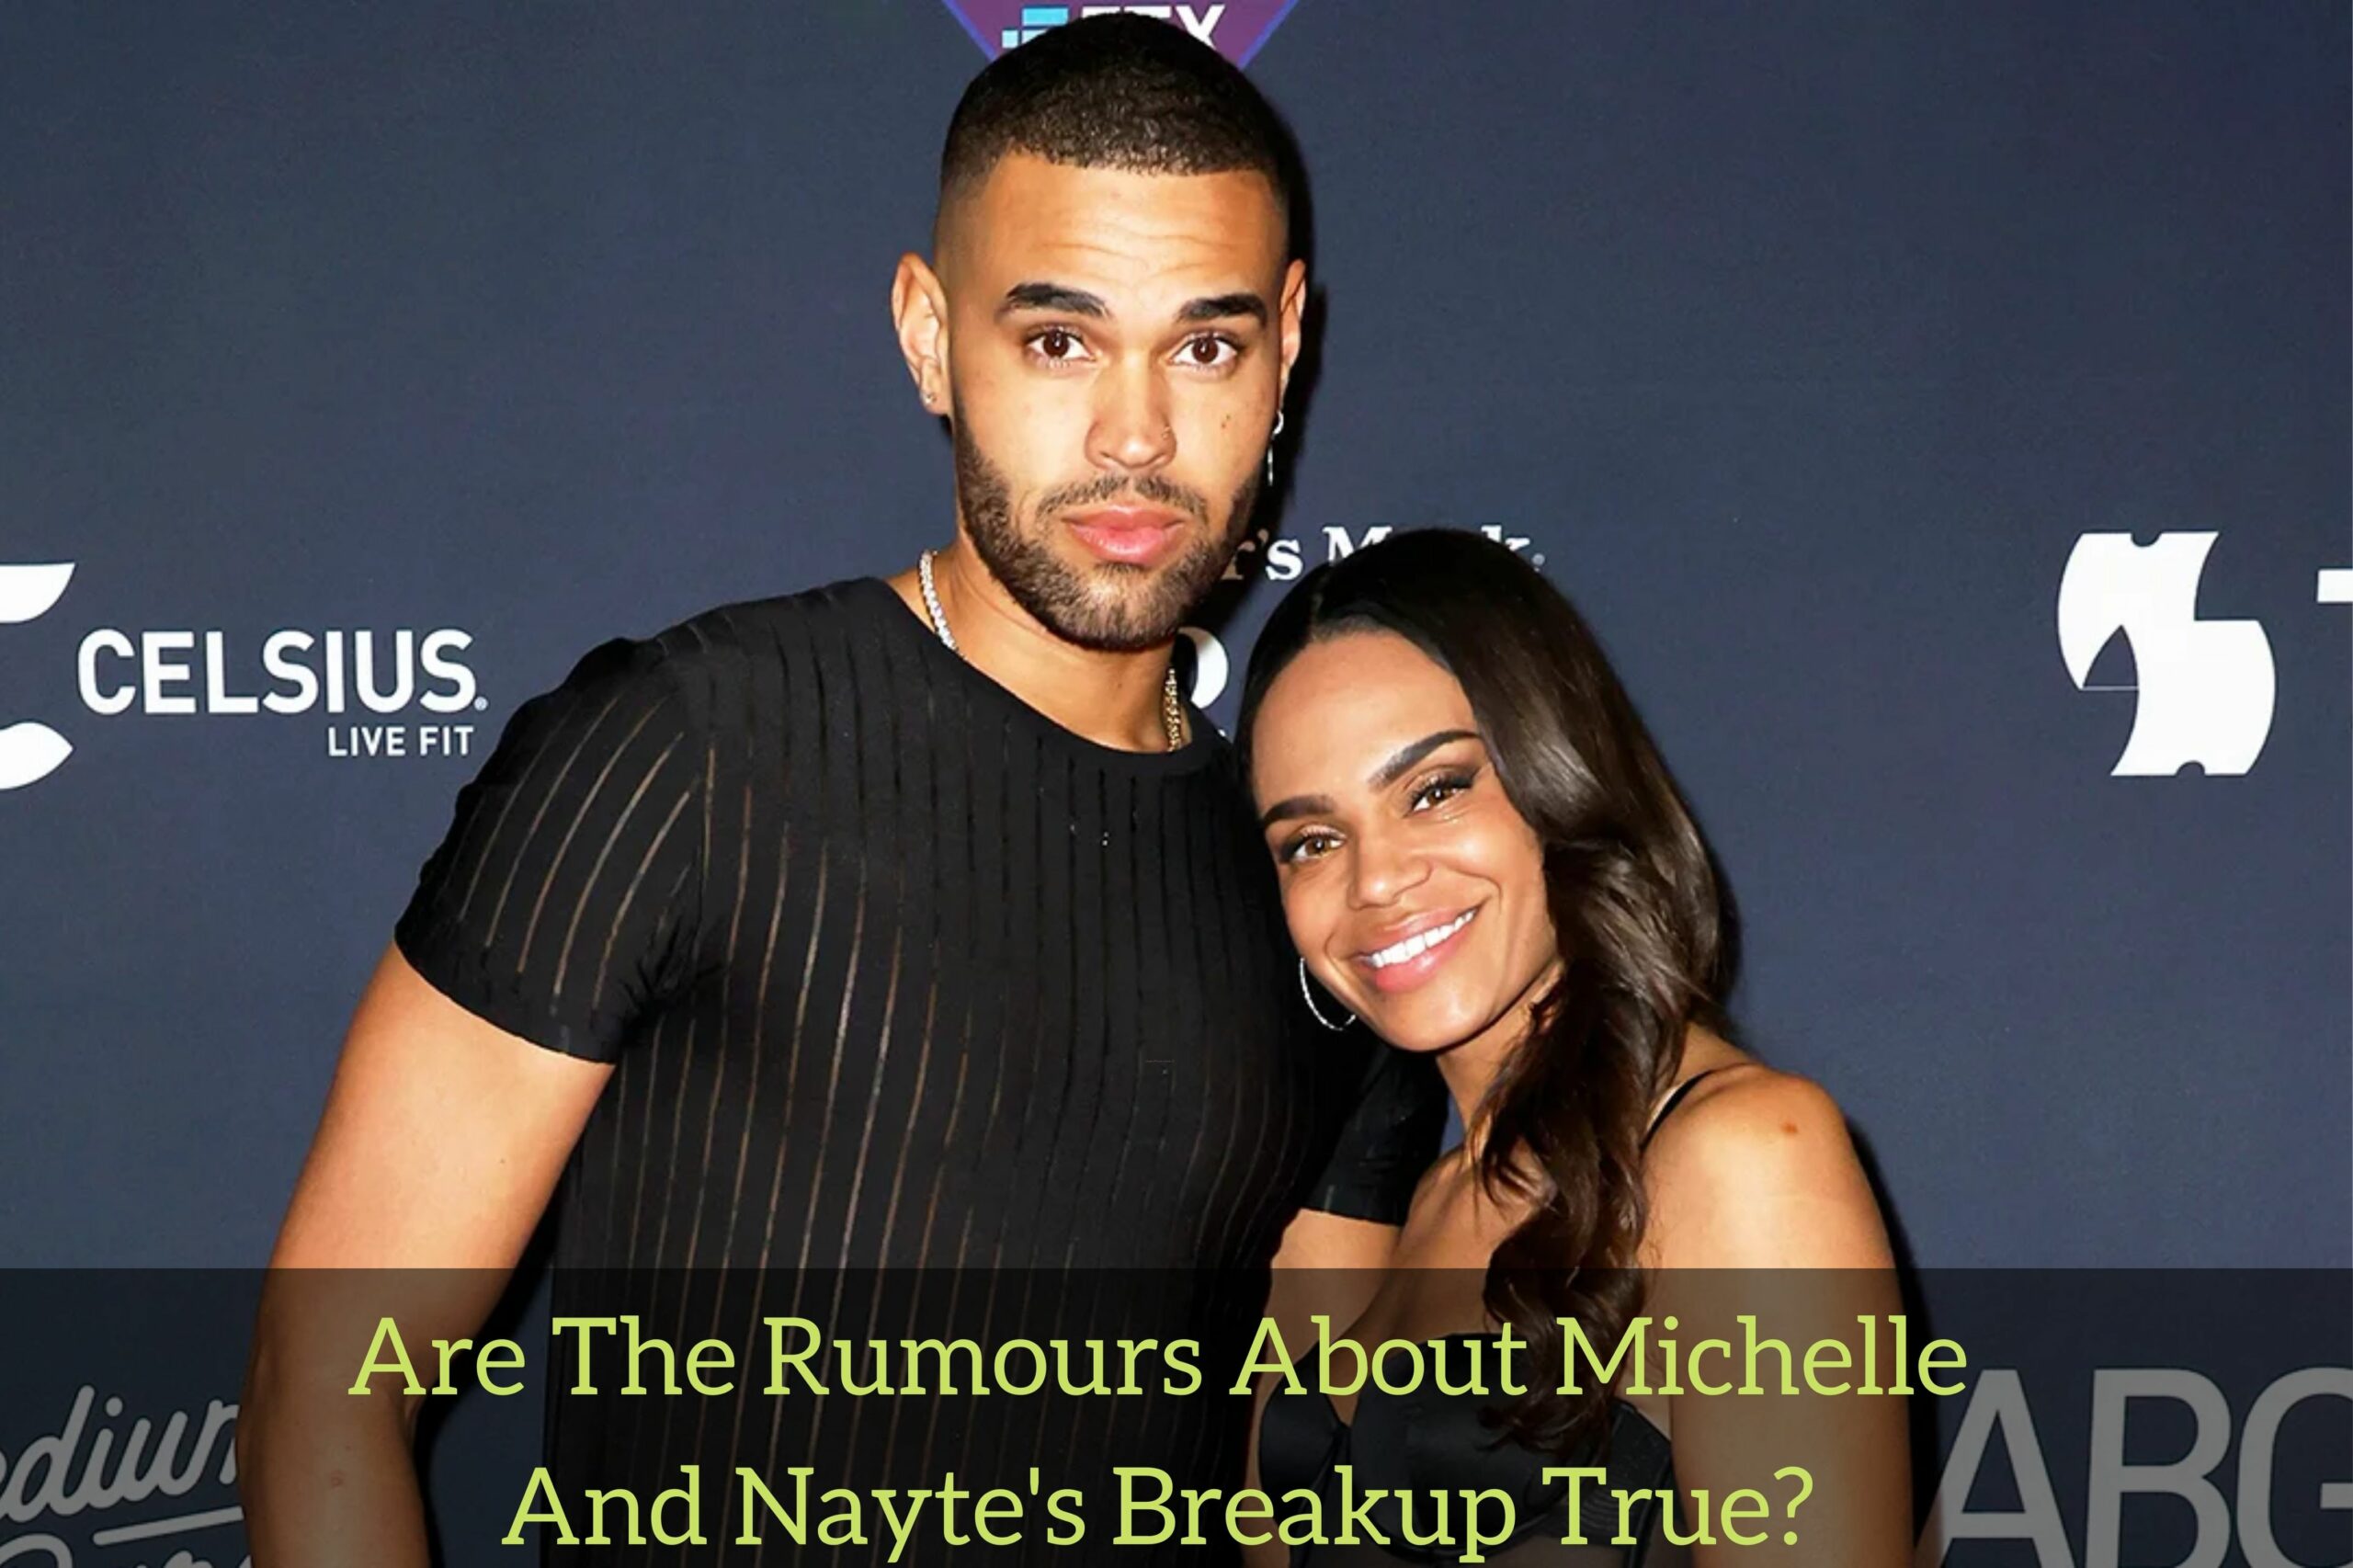 Are The Rumours About Michelle And Nayte's Breakup True?